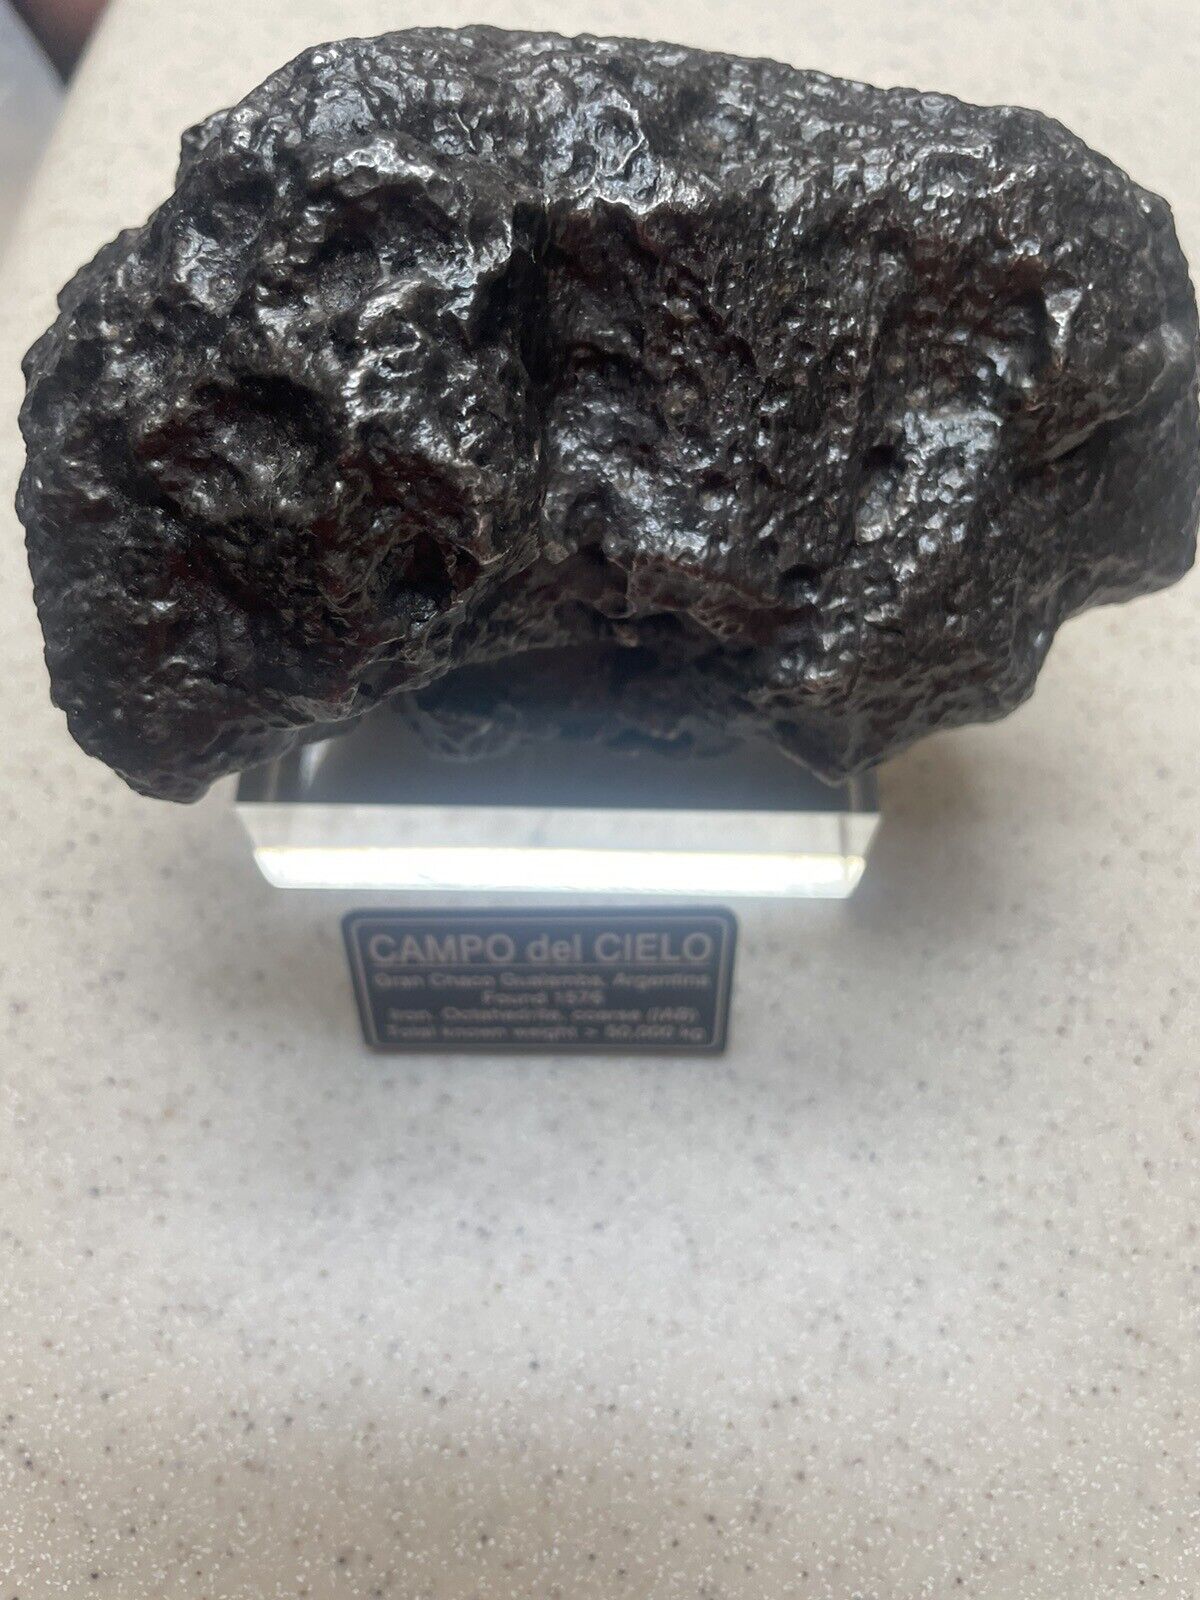 LARGE 2358 GM   CAMPO DEL CIELO METEORITE ;  Over 5 Lbs     5x3x3.5 In.